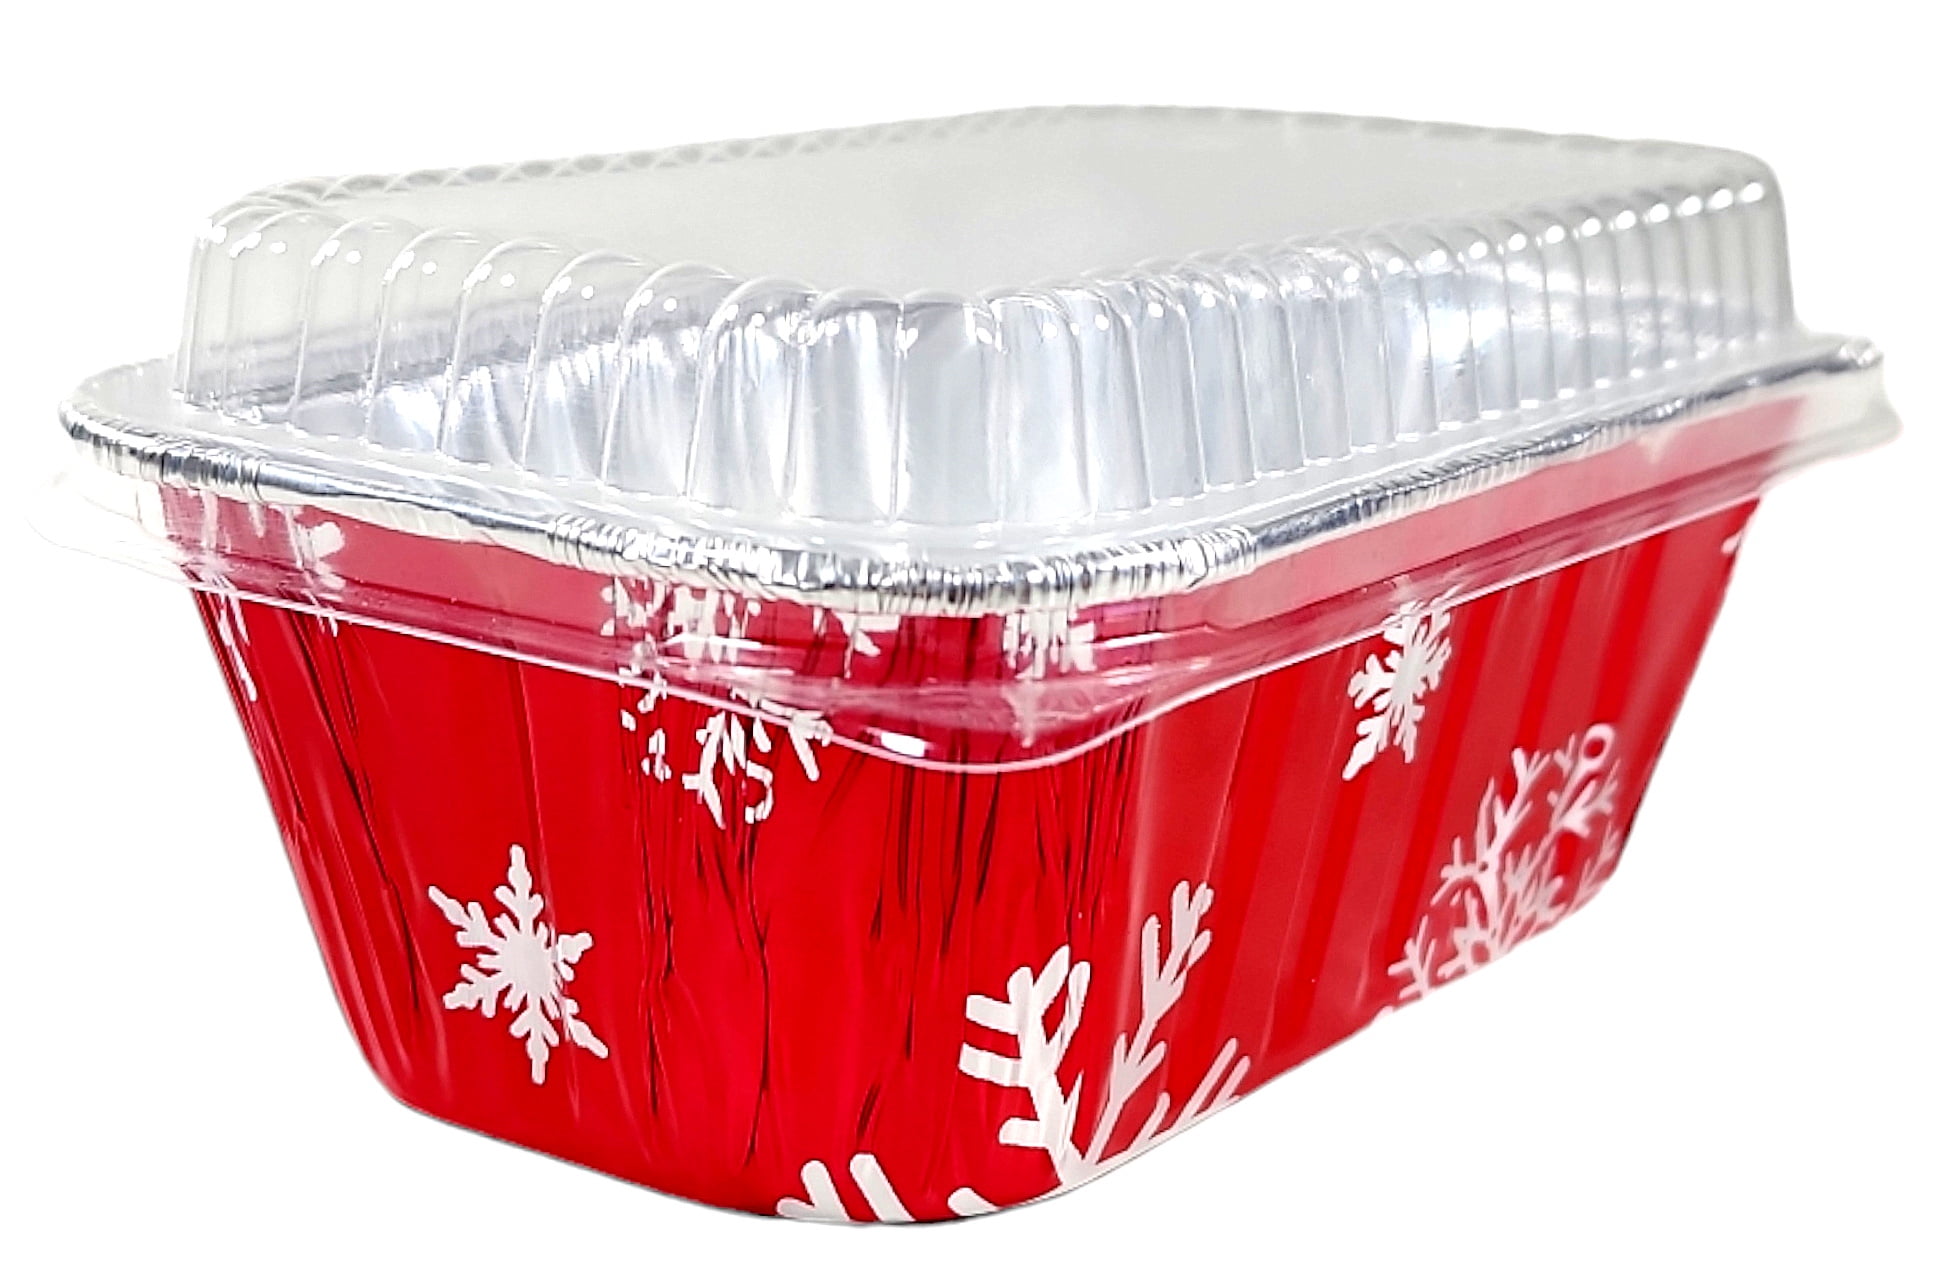 6 Christmas Holiday Holly Disposable Aluminum Baking Pans by